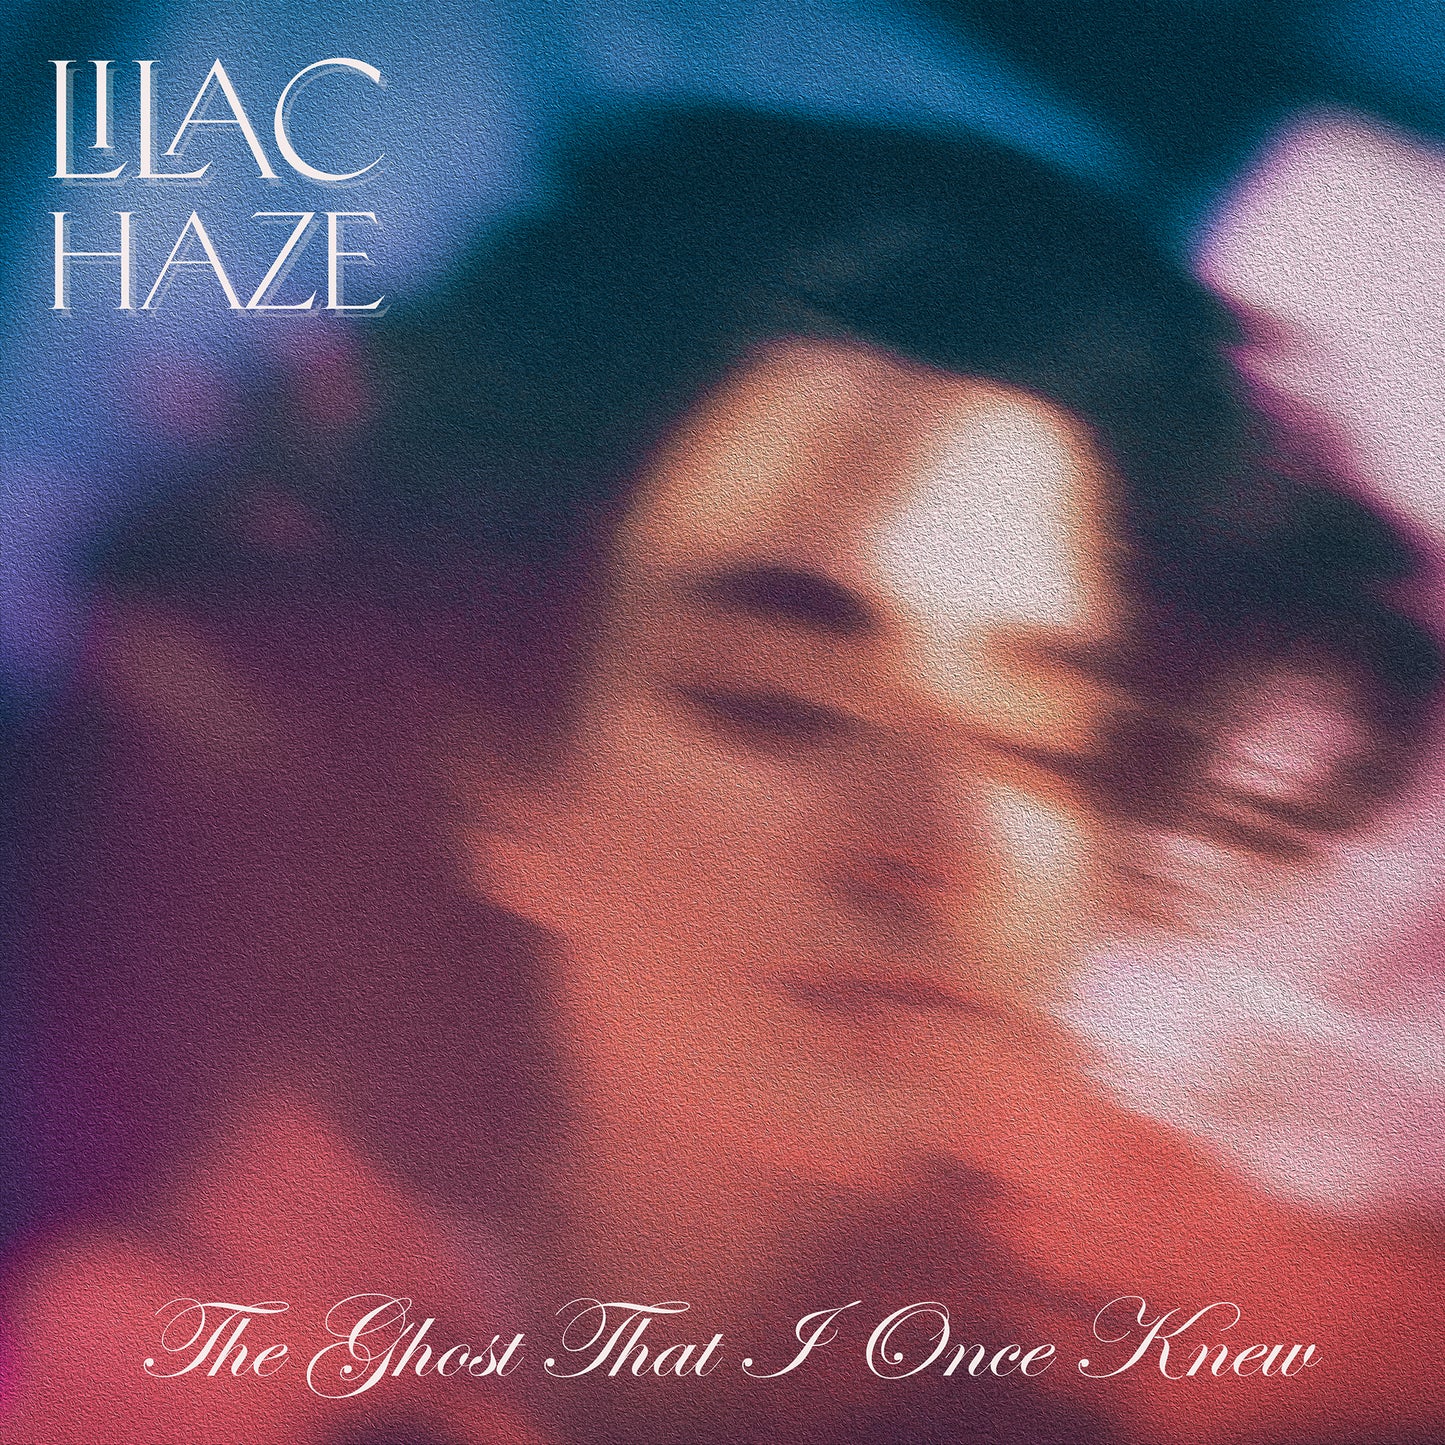 The Ghost That I Once Knew // Lilac Haze - Lilac Haze